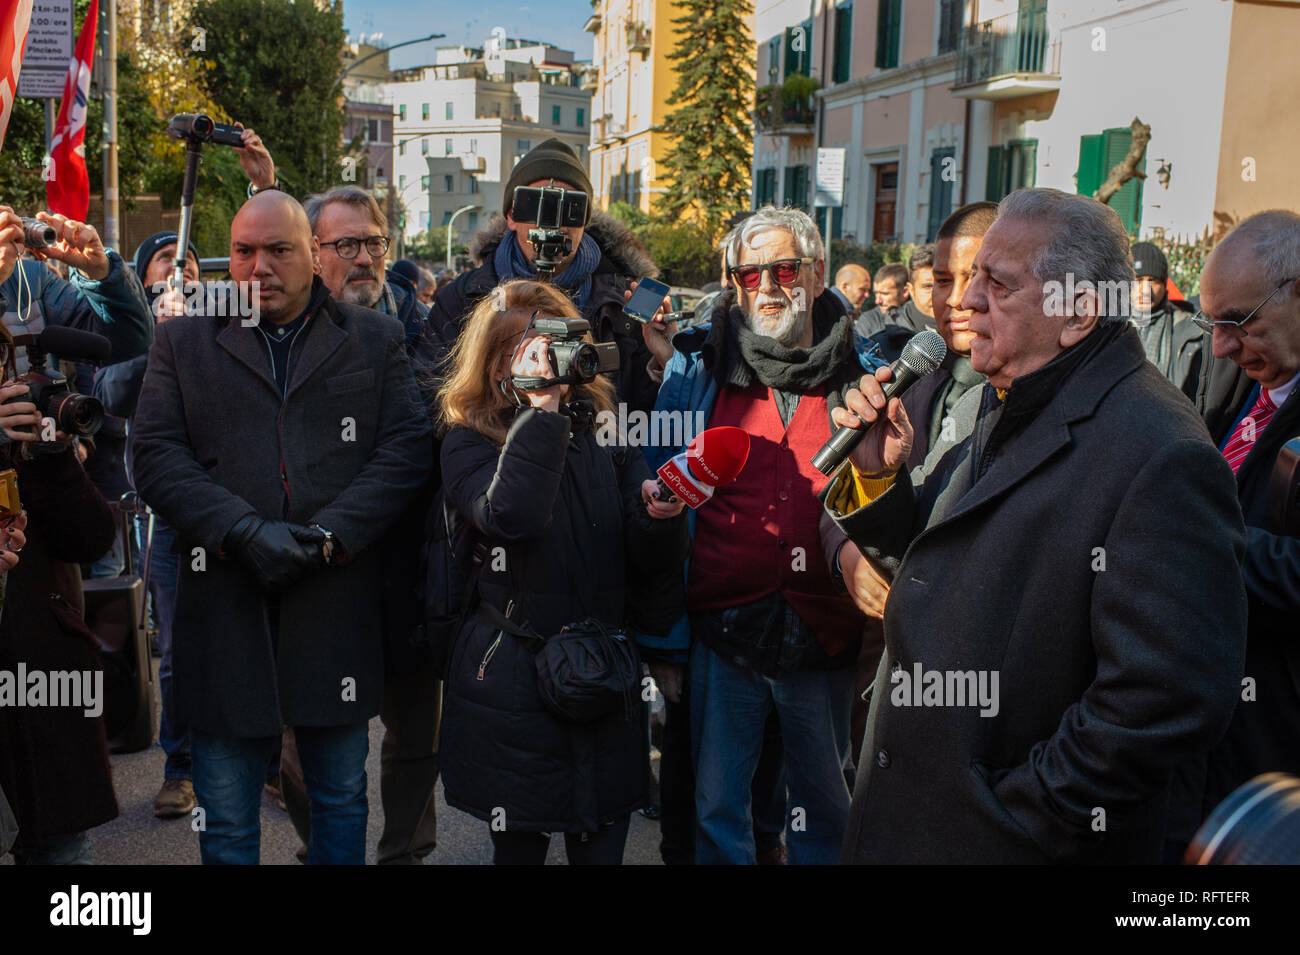 Rome, Italy. 26th January, 2019. In front of the Embassy of the Bolivarian Republic of Venezuela, in Rome, the Venezuelan Ambassador Juliàn Isaìas Rodríguez Díaz meets demonstrators from left-wing Italian parties who have come to show solidarity with the government of President Nicolás Maduro Credit: Roberto Nistri/Alamy Live News Stock Photo